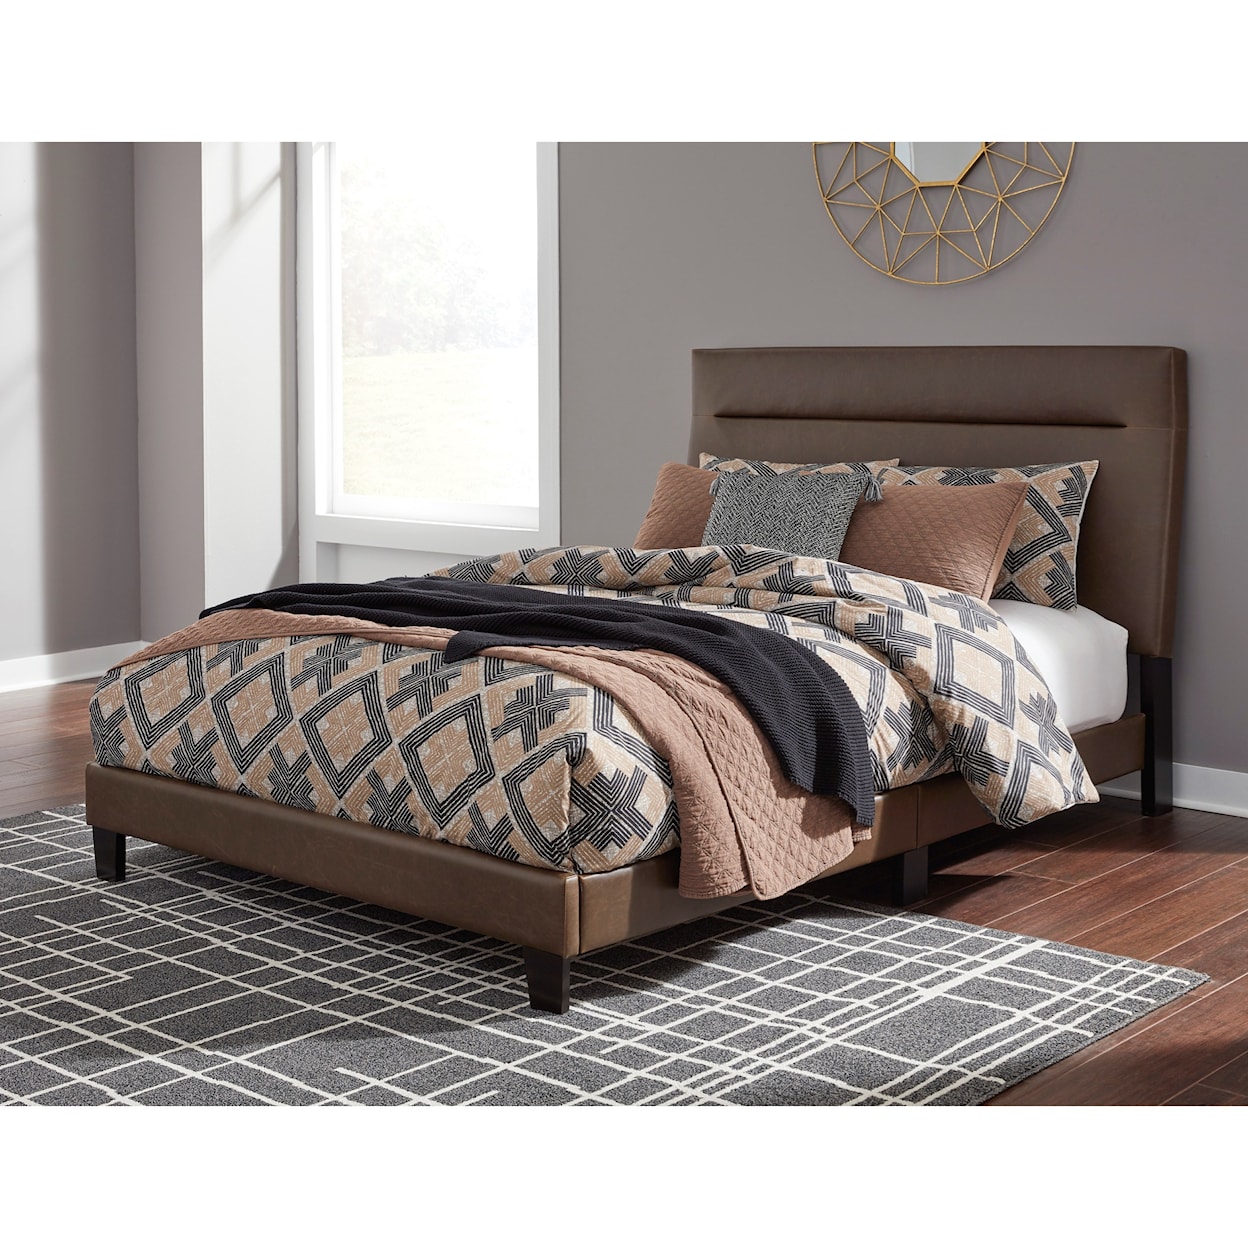 Signature Design by Ashley Furniture Adelloni Queen Upholstered Bed